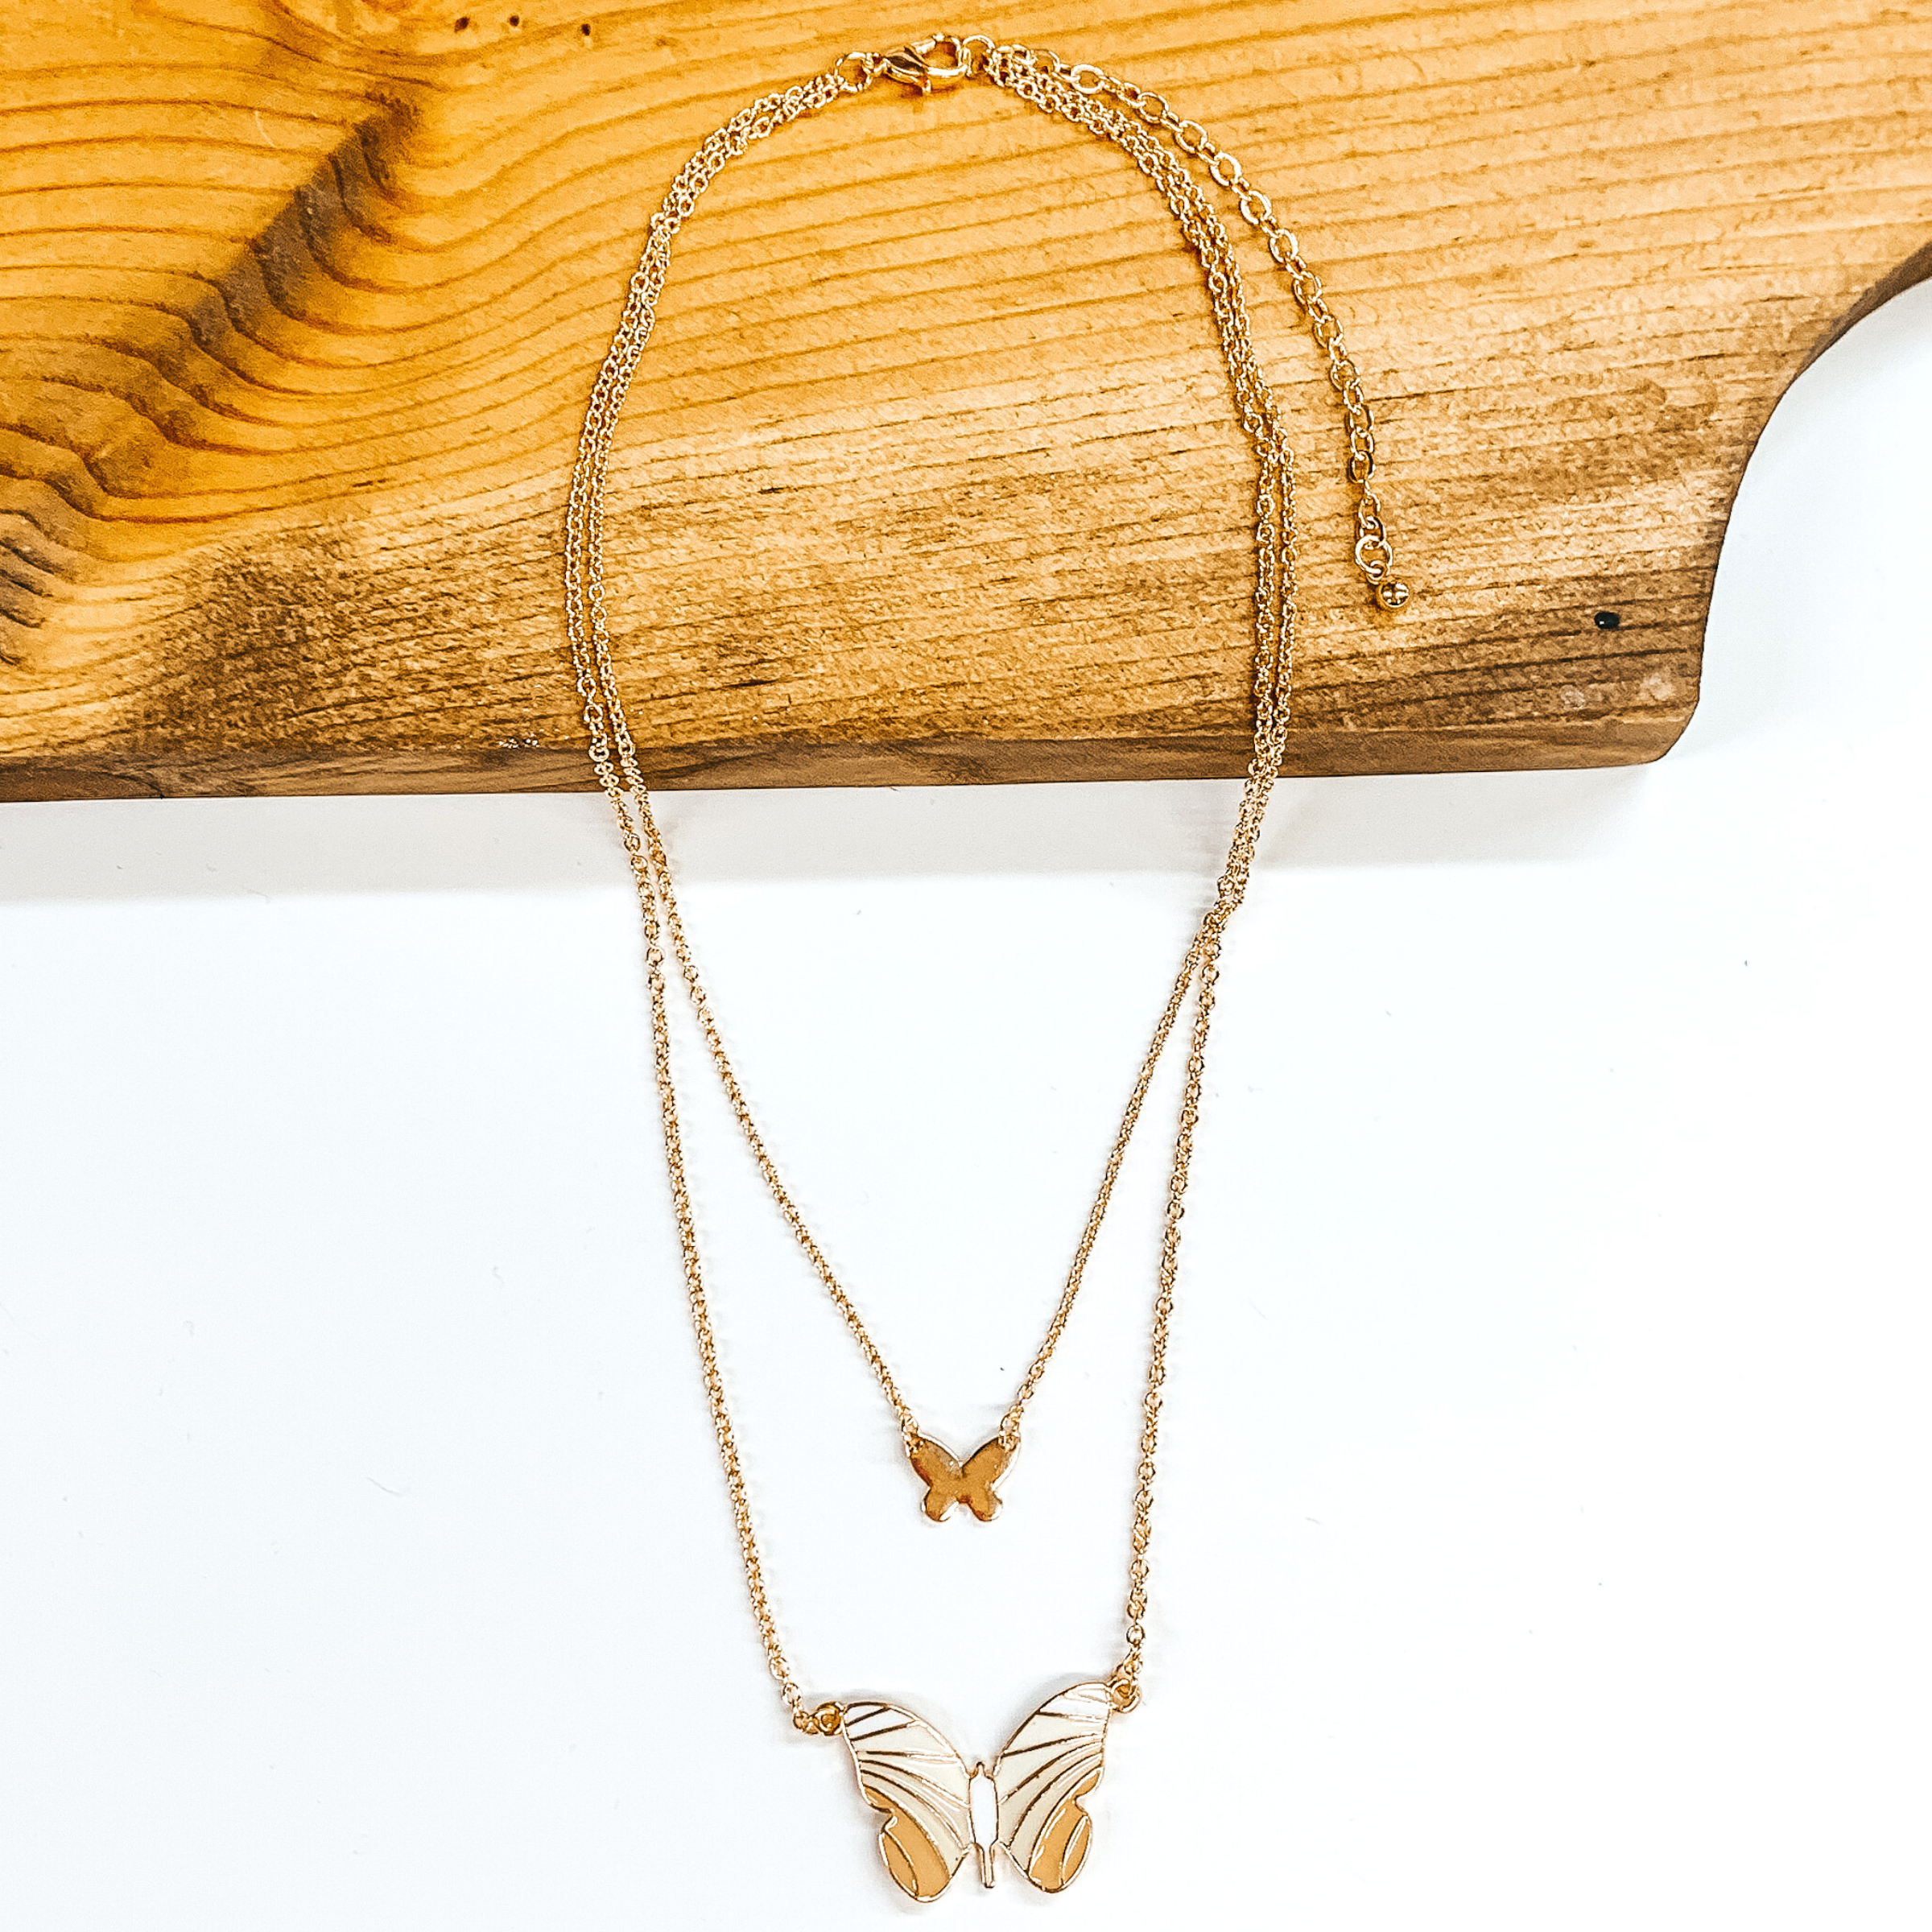 This a double gold chained necklace. The shorter chain has a small gold butterfly chain. The longer strand has a bigger butterfly pendant. The colored of the wings have colors starting off with white and getting darker to beige at the bottom of the wings. This necklace is partially laying on a dark piece of wood on a white background. 